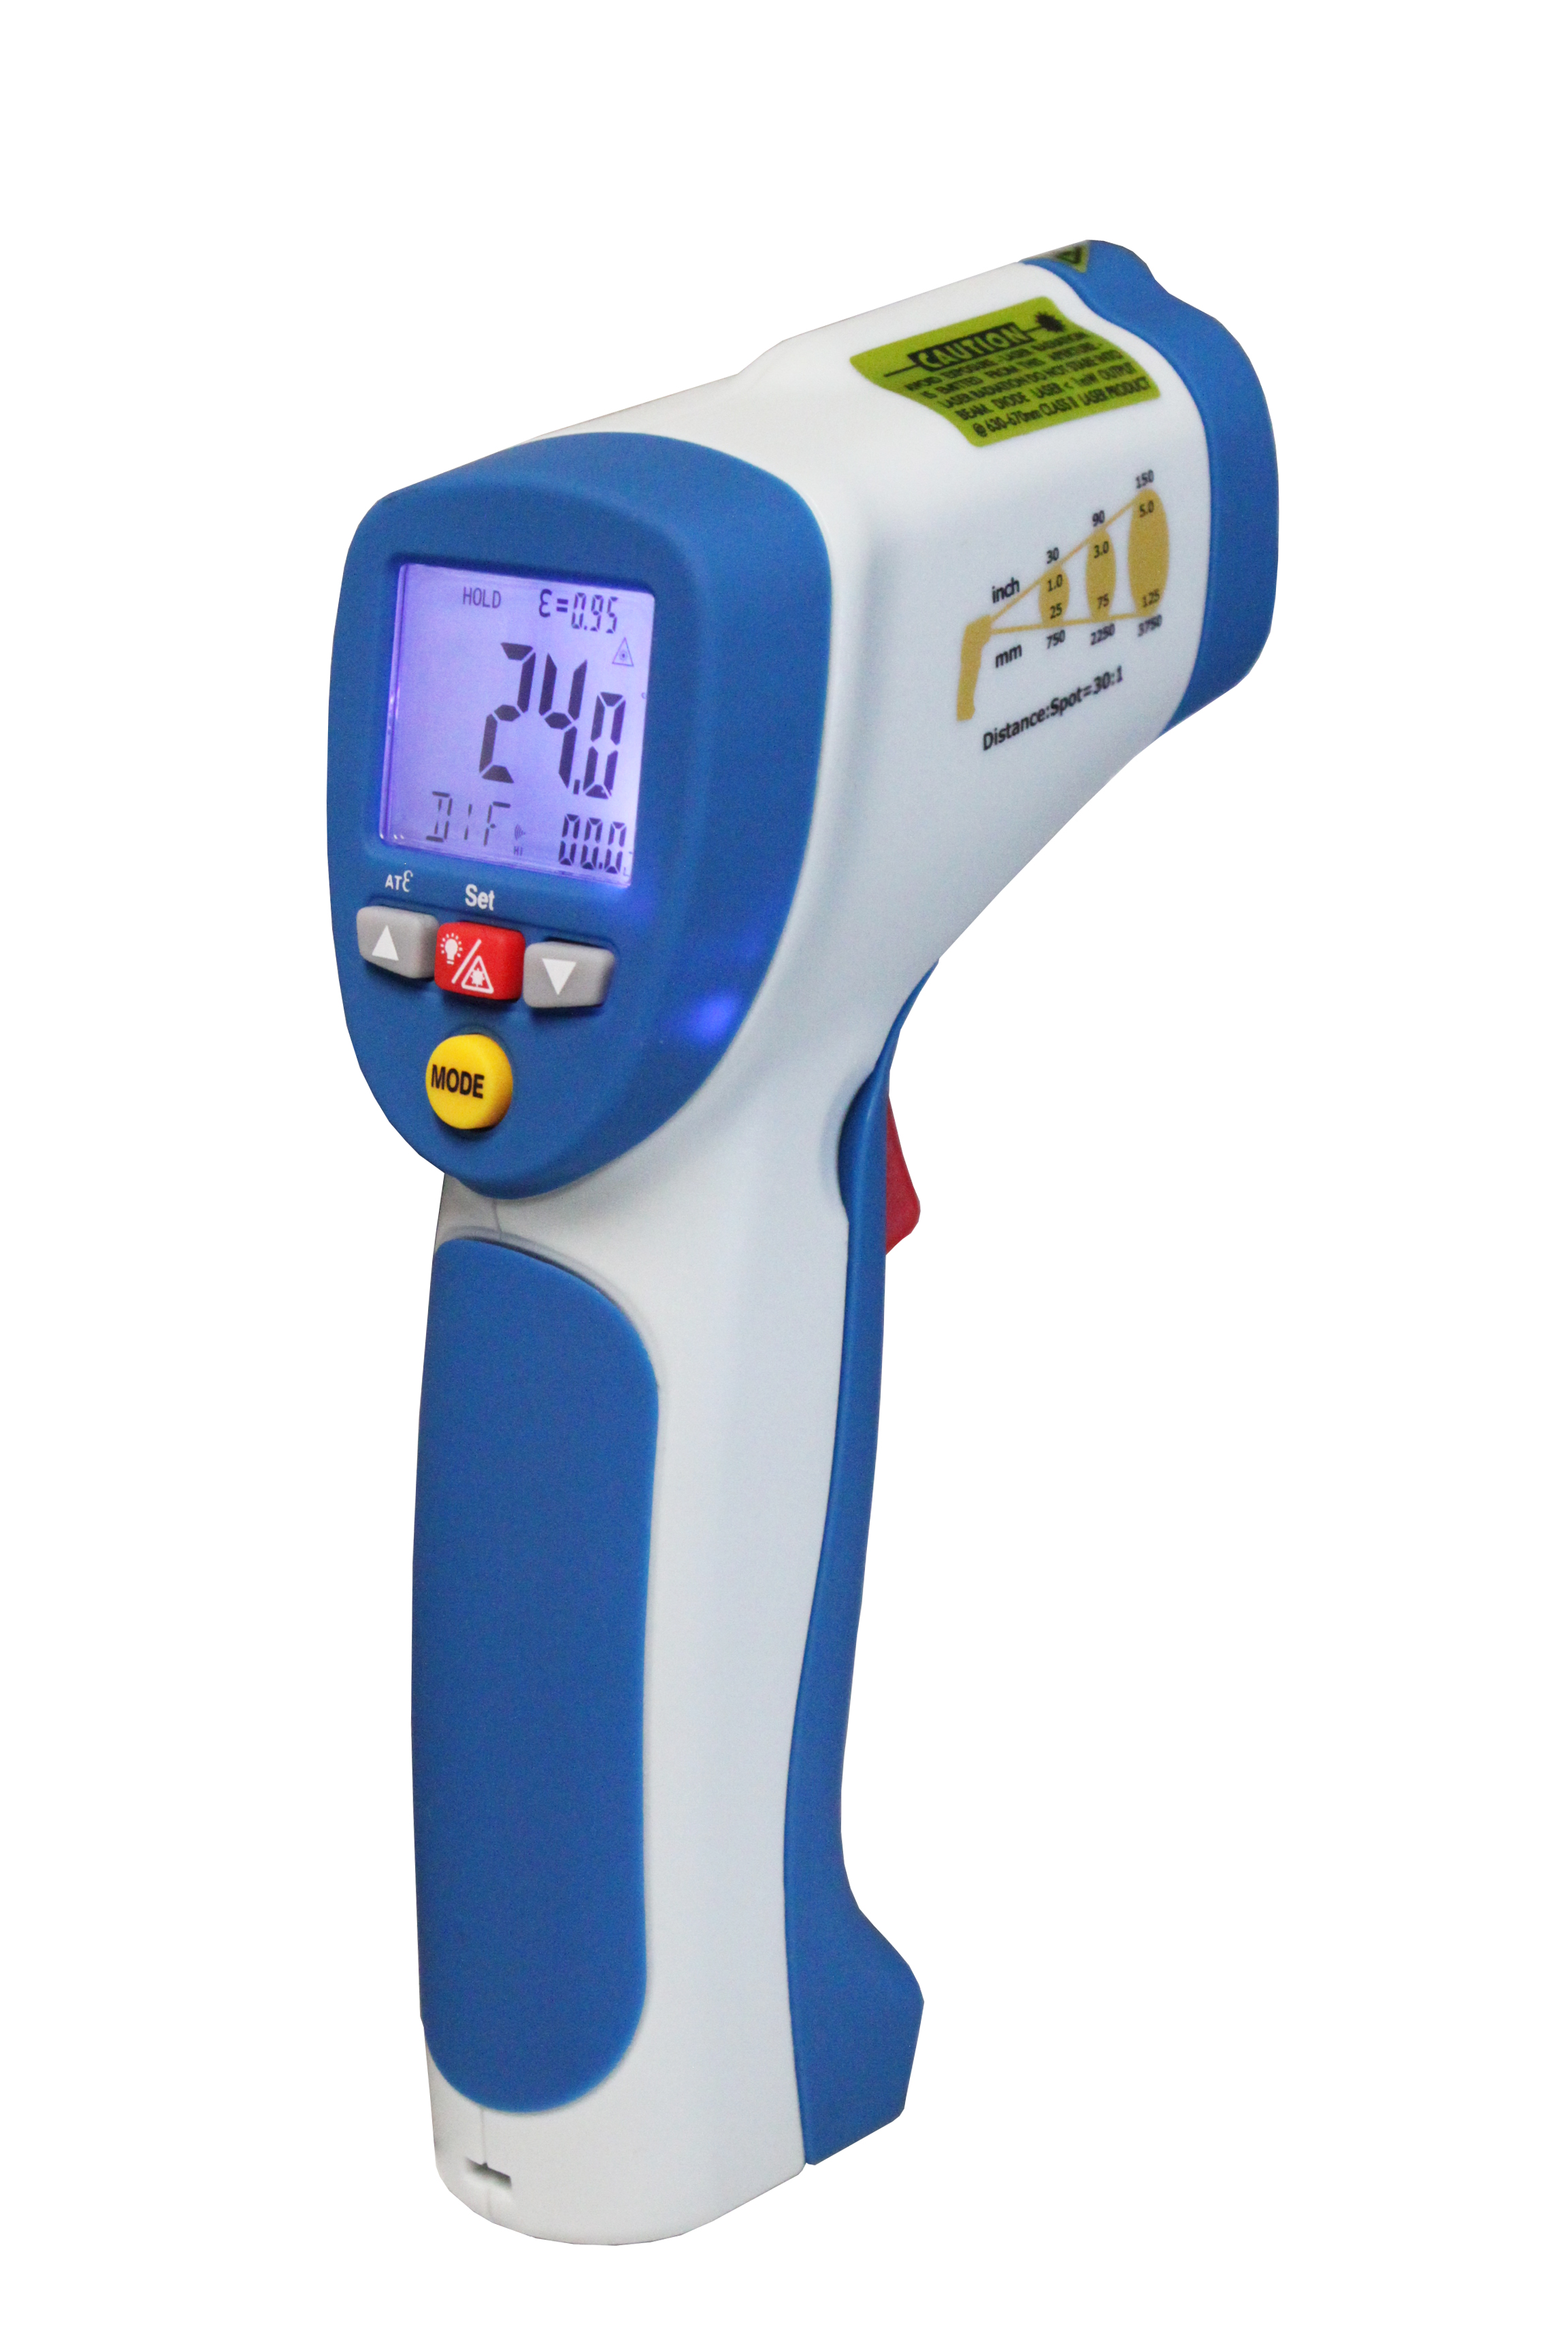 «PeakTech® P 4950» 2 in 1 IR-/Typ-K-Thermometer